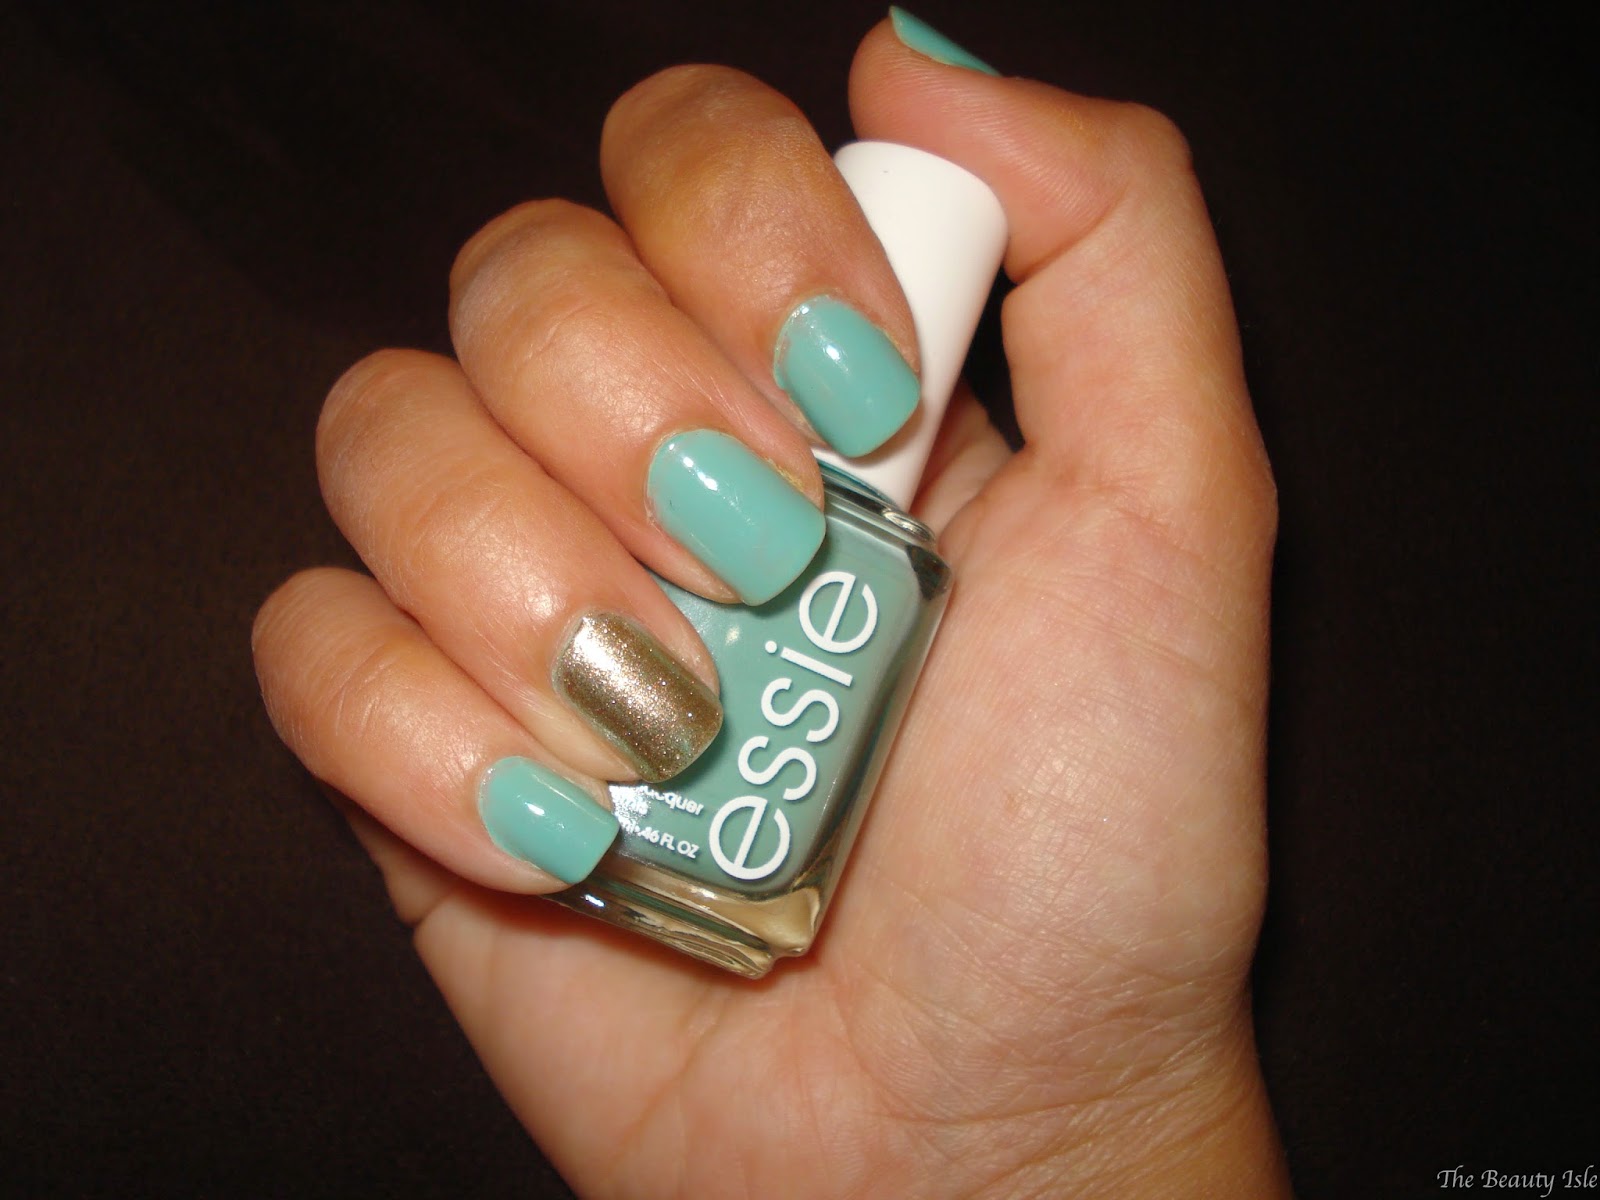 2. Essie Nail Polish in "Turquoise & Caicos" - wide 3